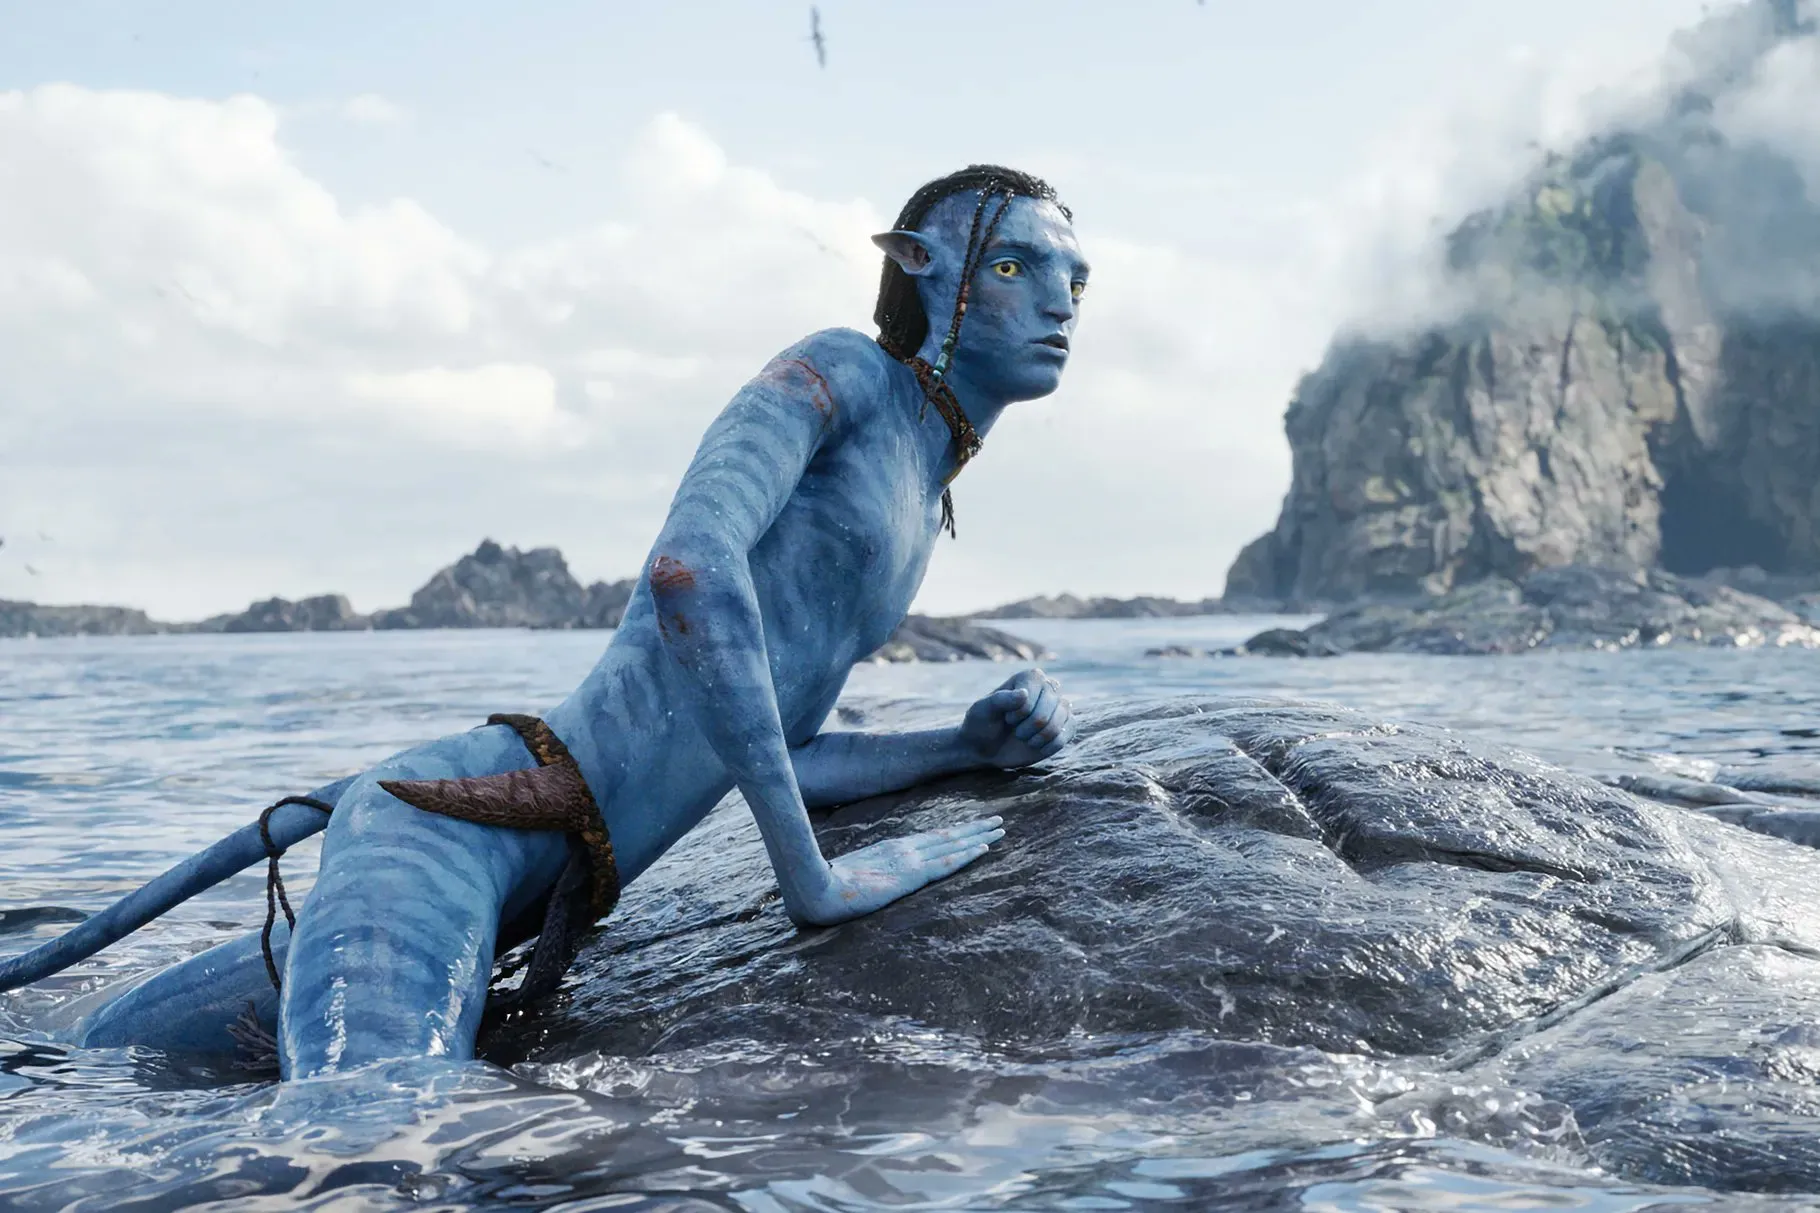 Will 'Avatar 2' exceed 1 billion in global box office within 10 days? It took 'Avatar' three weeks to hit this box office 13 years ago | FMV6